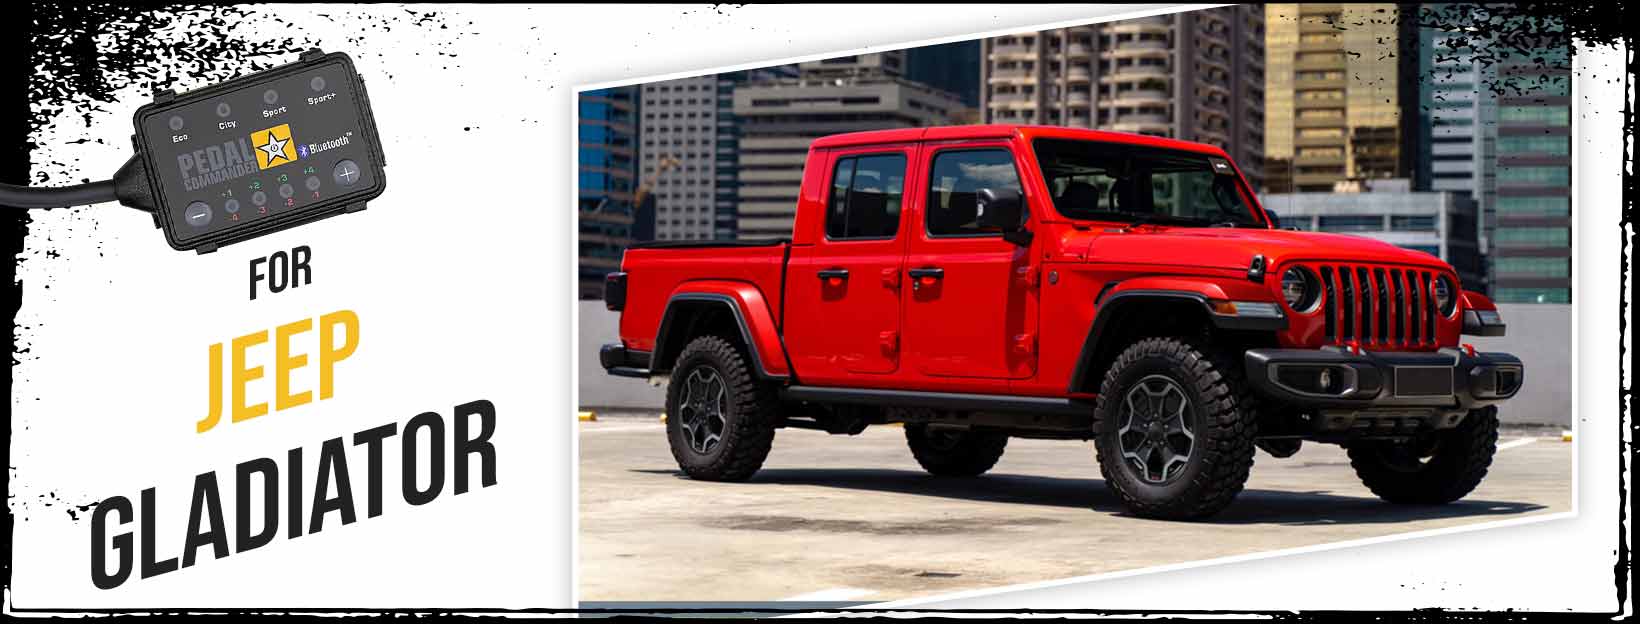 Pedal Commander for Jeep Gladiator